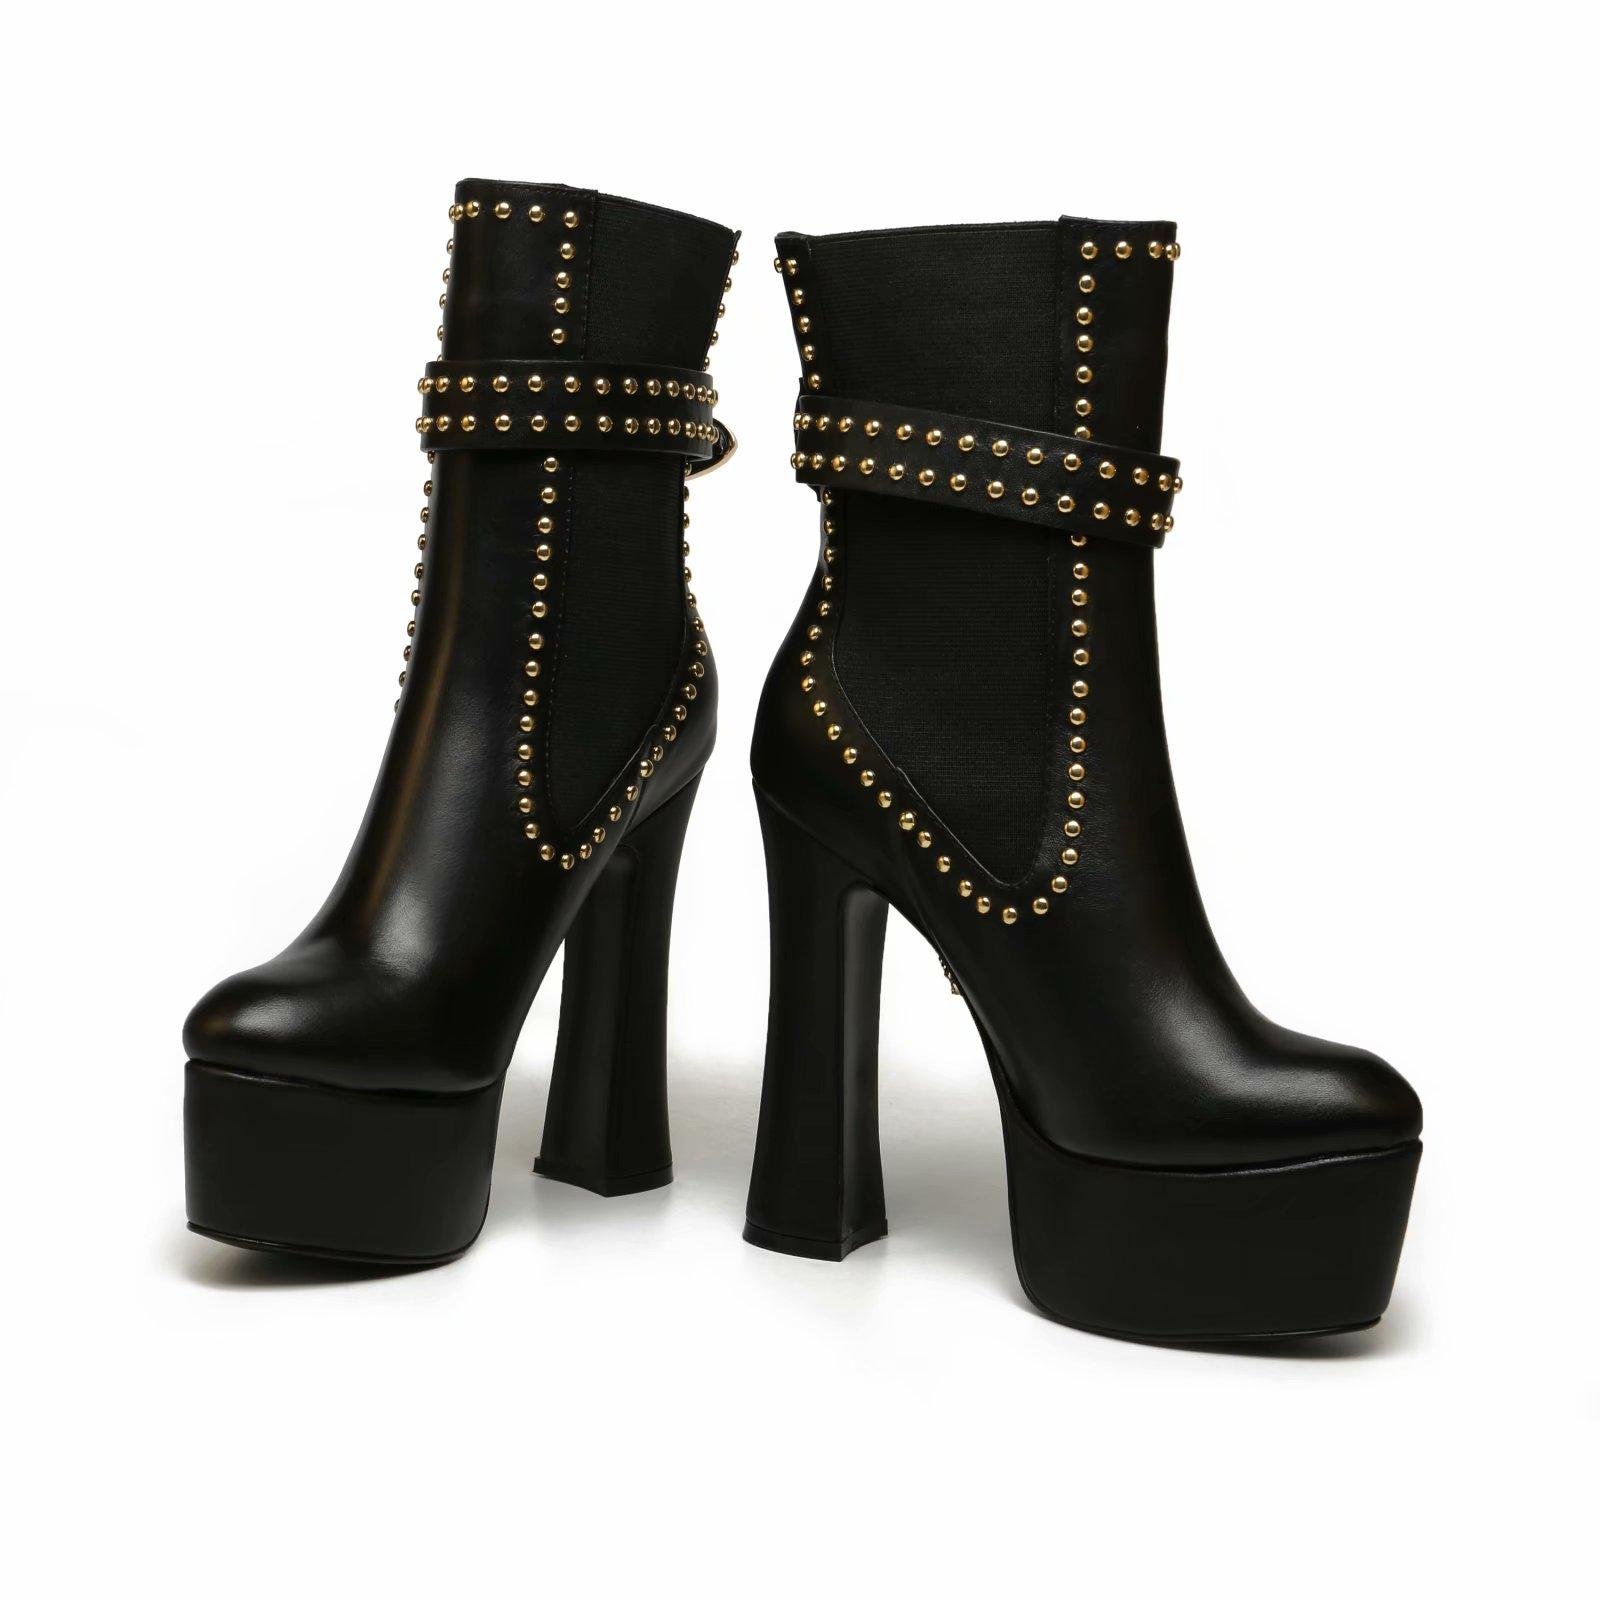         Studded Leather Platform Ankle Boots for Women high heel boots  2